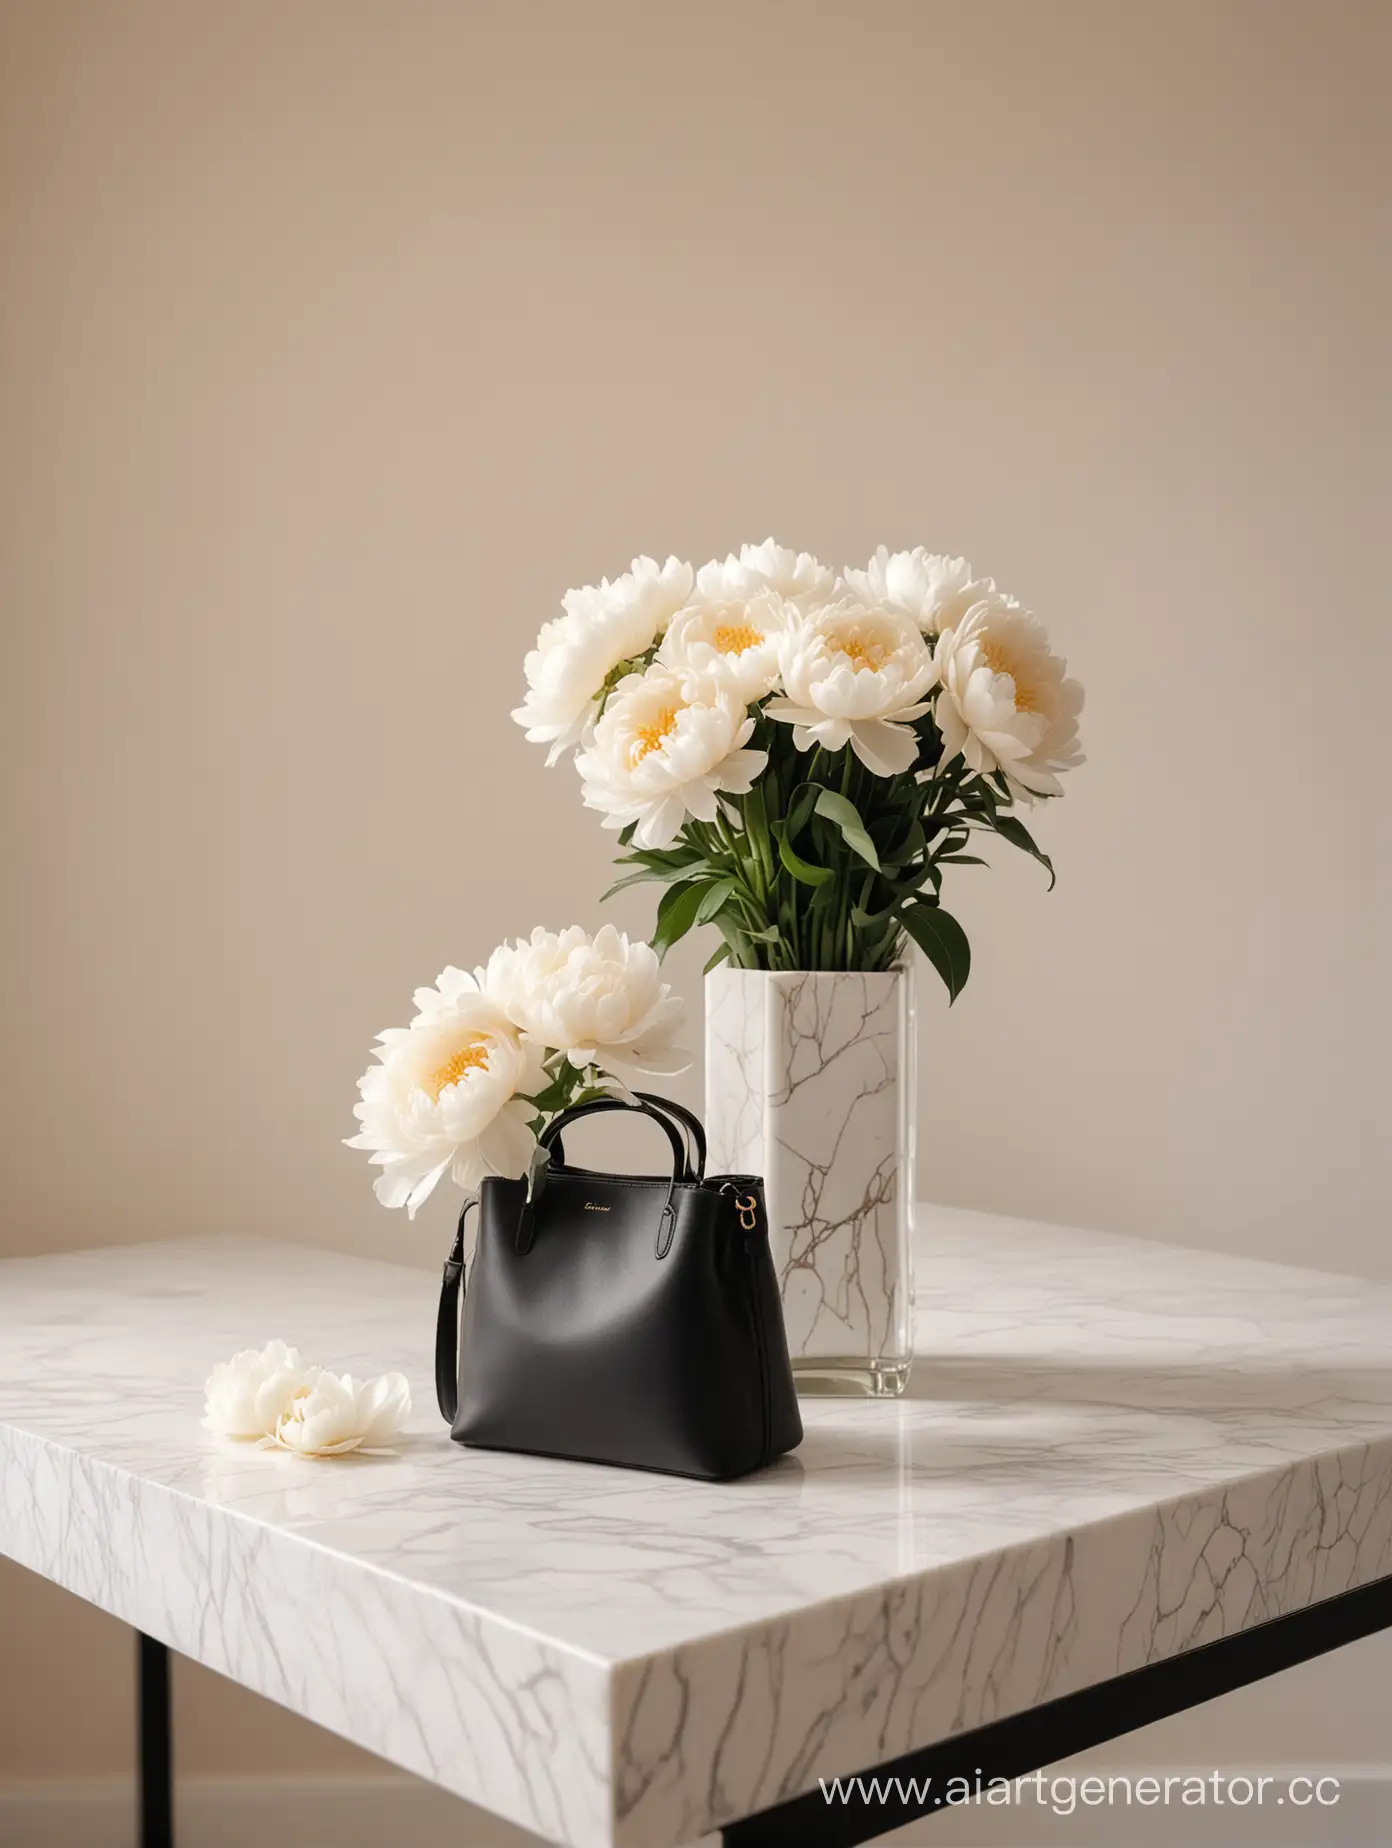 Chic-Black-Mini-Bag-with-White-Peonies-on-Marble-Table